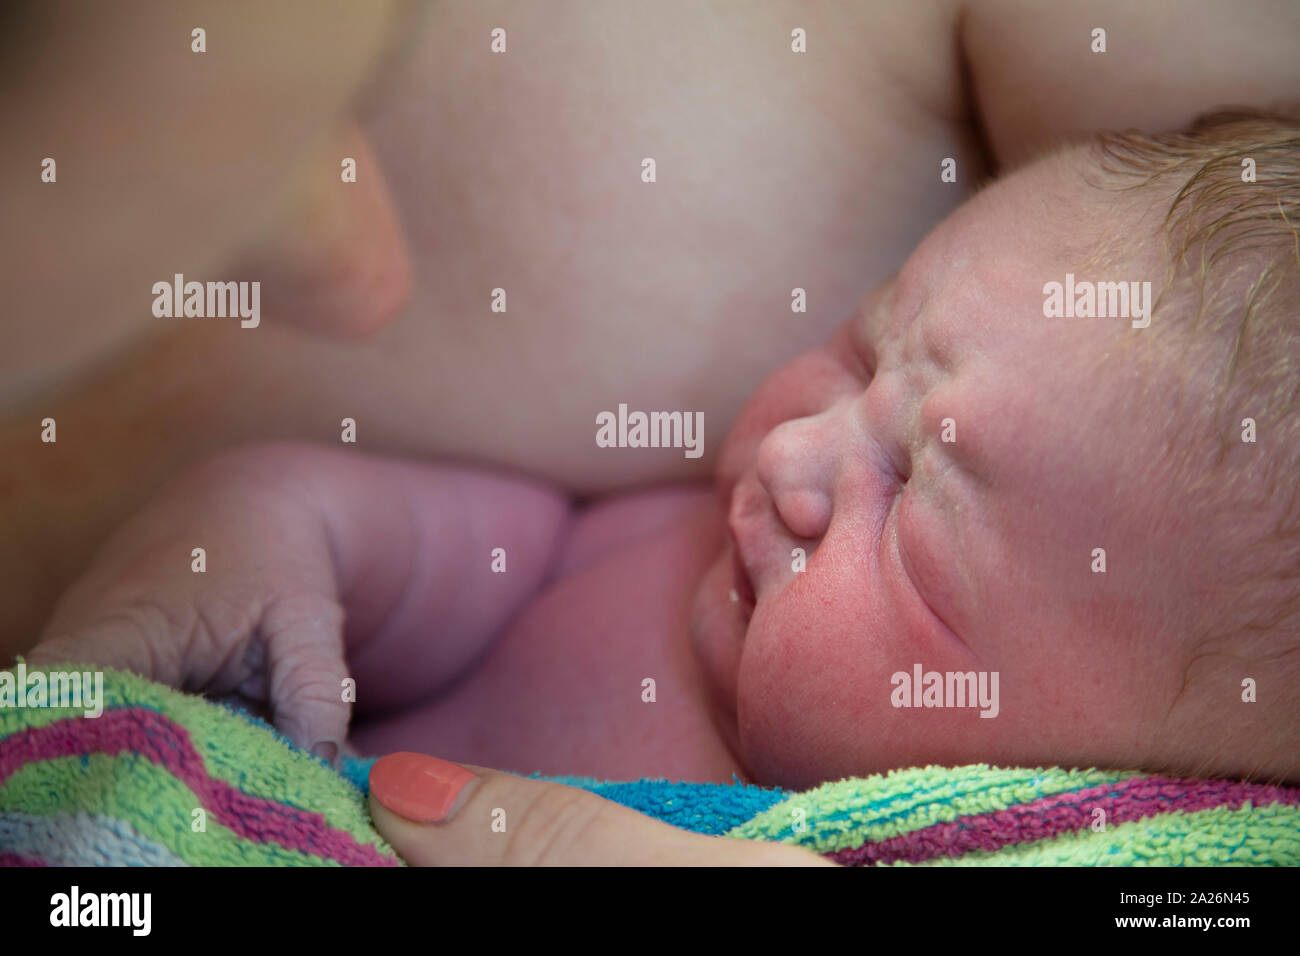 A newborn baby being embraced by their mother after being born Stock Photo